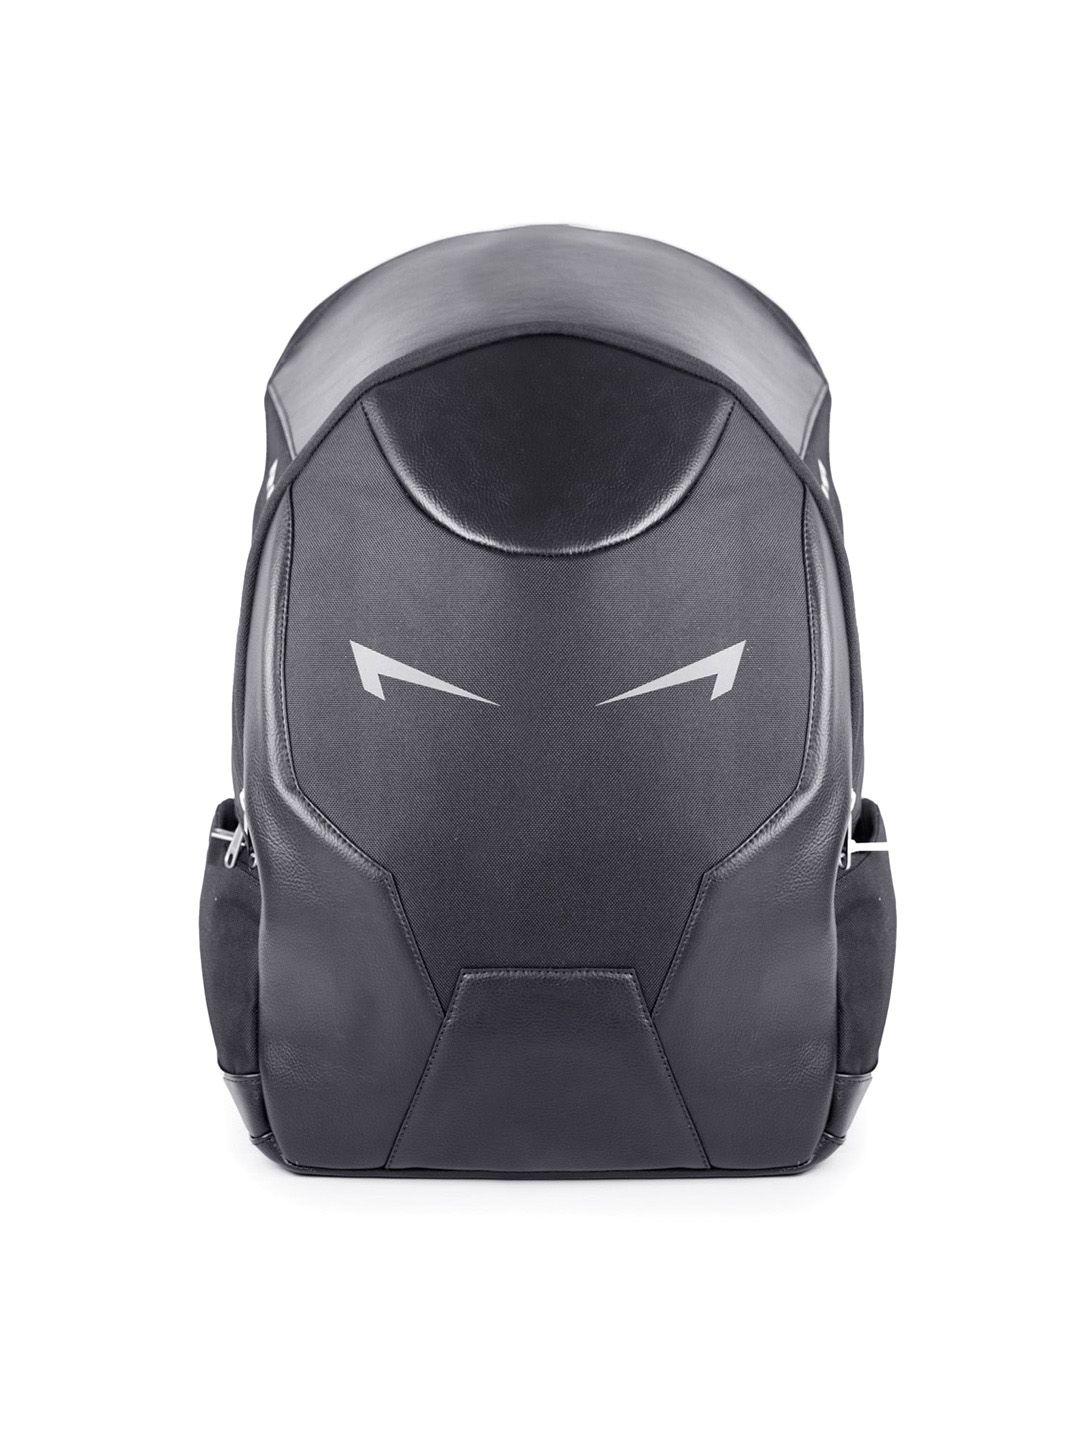 gods unisex black & grey rudra the mighty laptop backpack